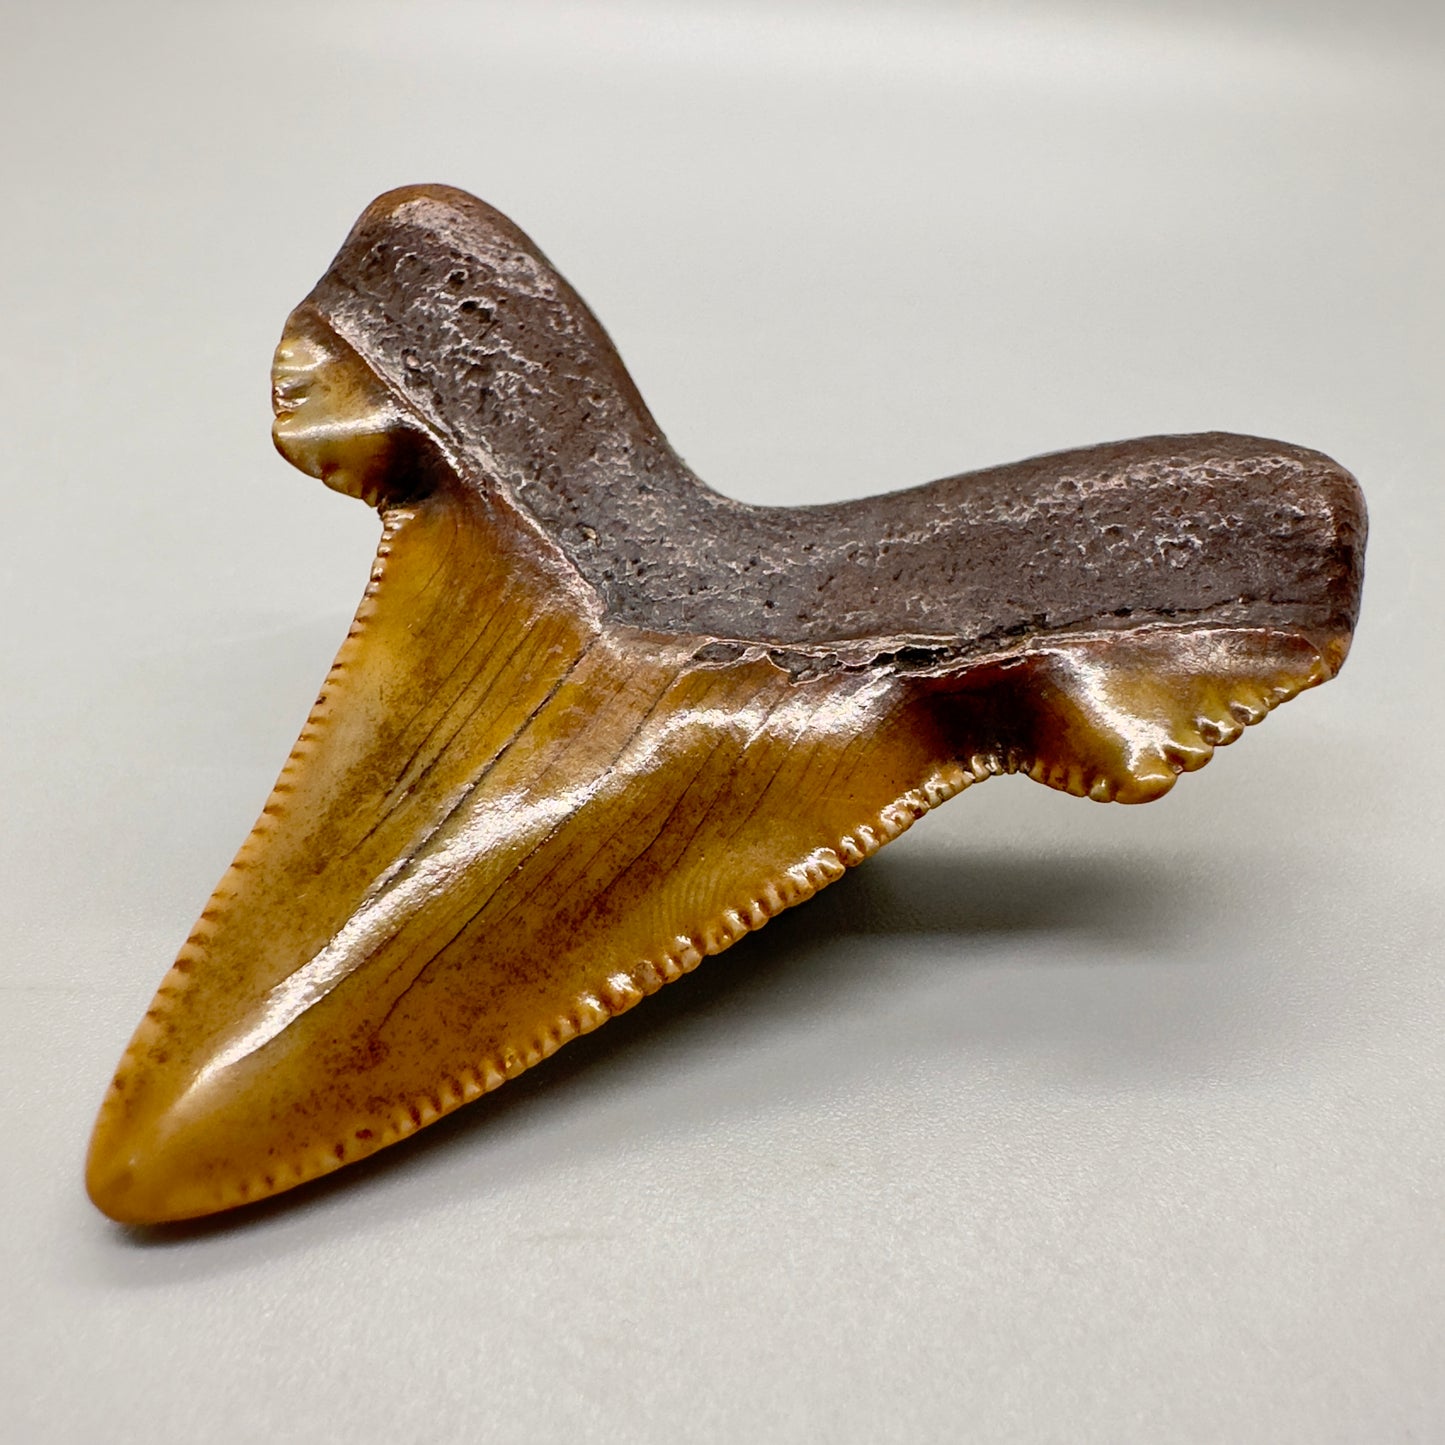 Colorful 2.36" Fossil Carcharocles Sokolowi Shark Tooth from the Suwannee River in Florida